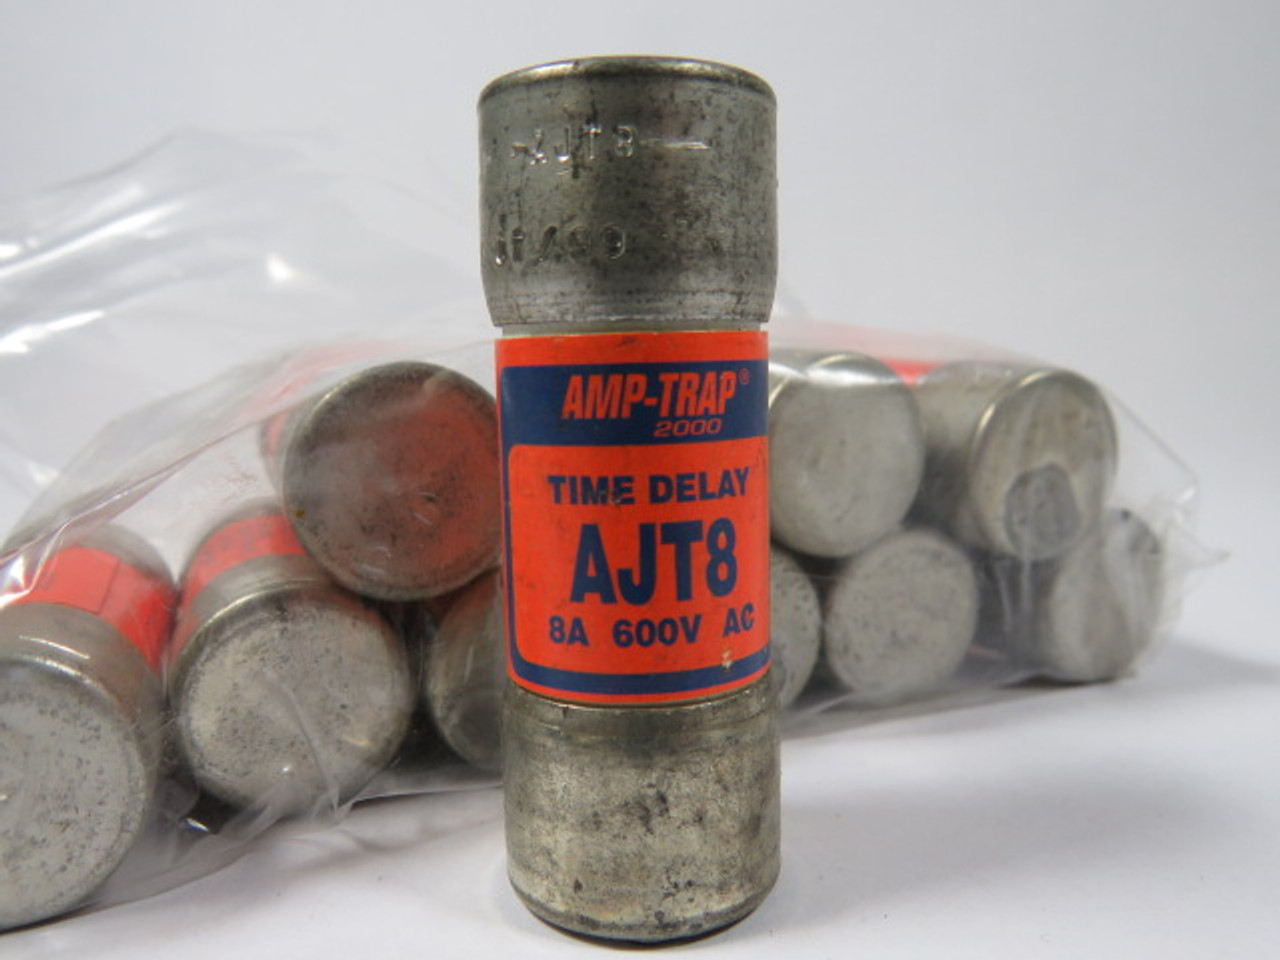 Gould Shawmut AJT8 Amp-Trap Time Delay Fuse 8A 600V Lot of 10 USED